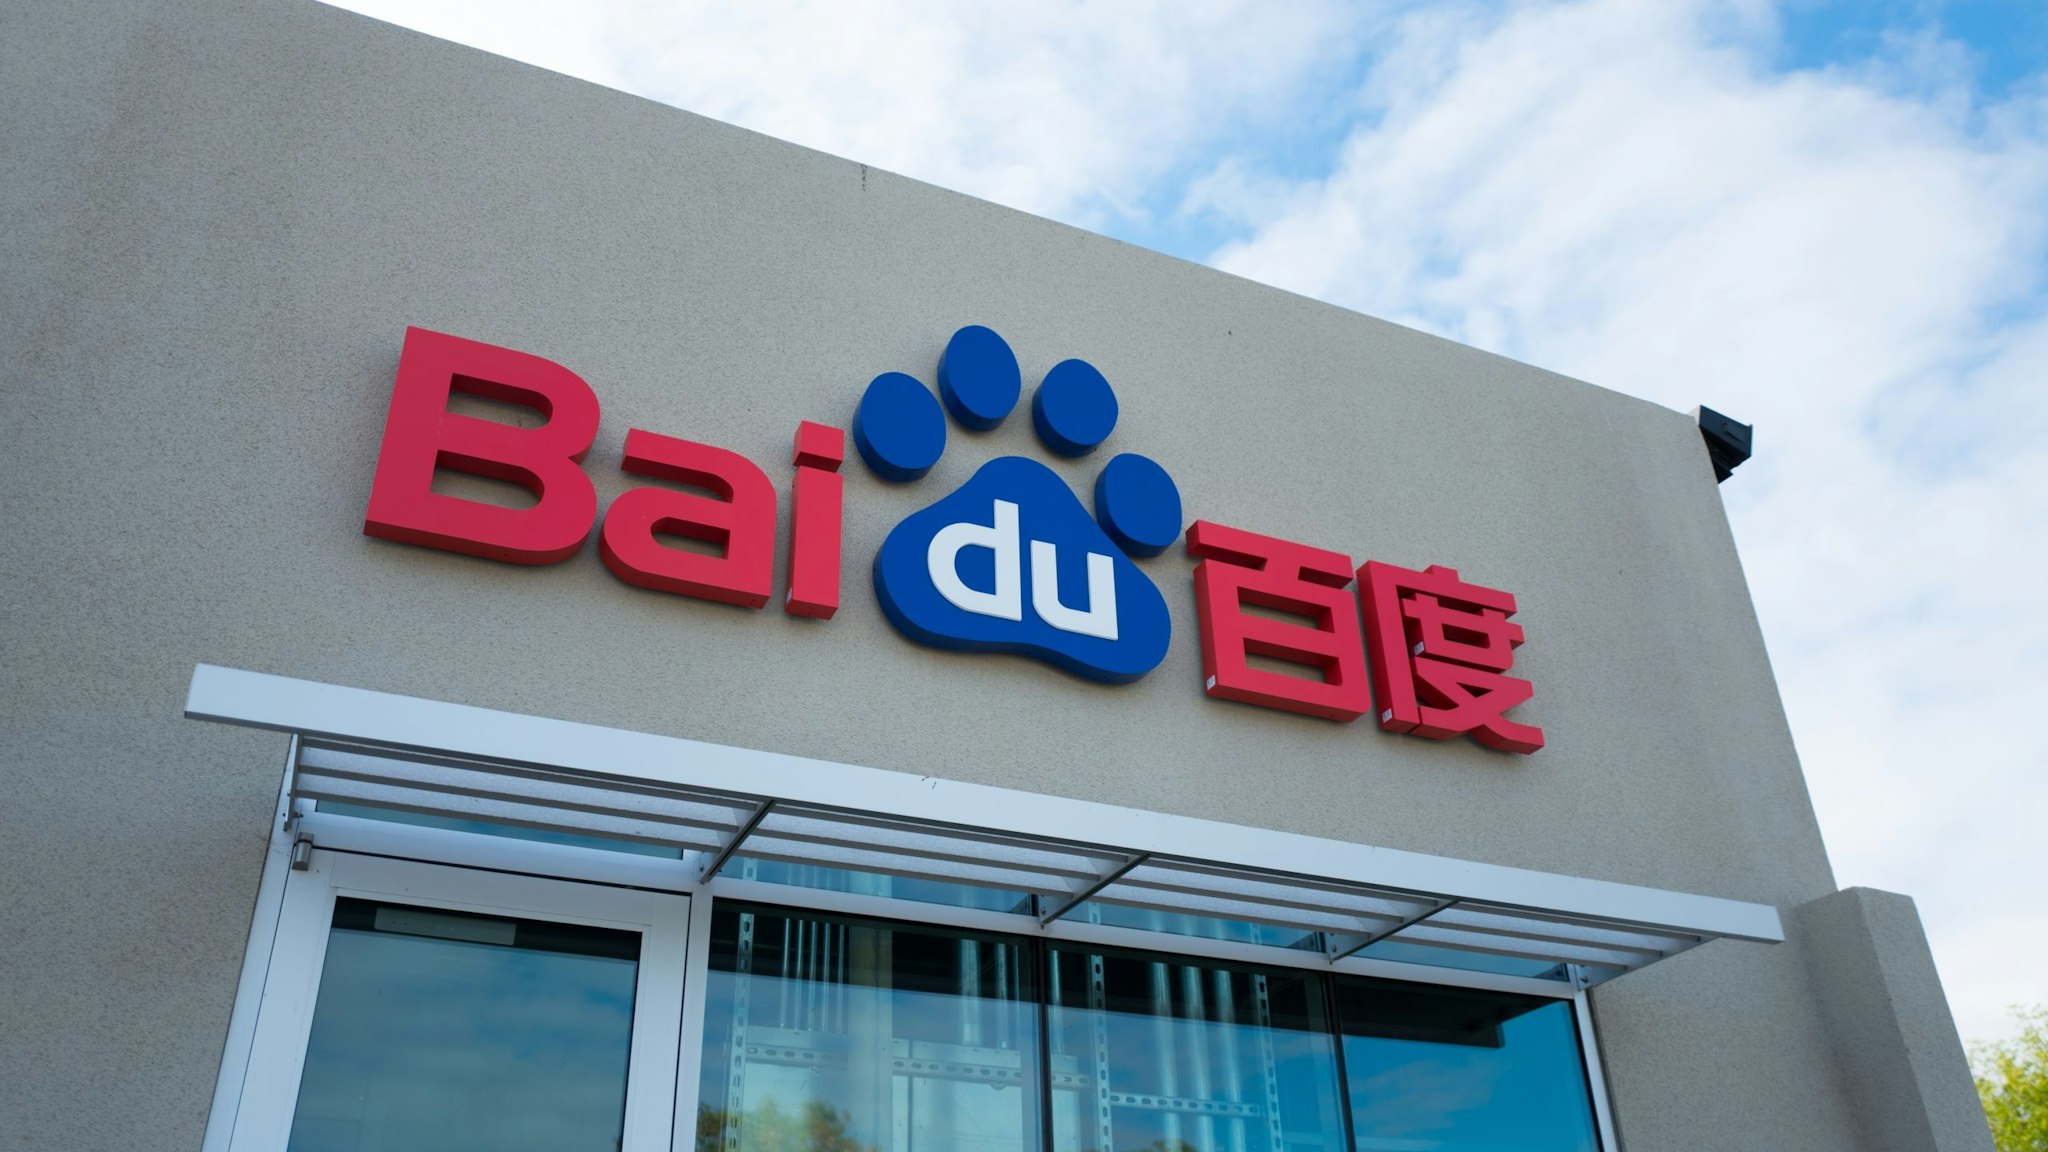 Logo on facade of the United States headquarters of Chinese technology company Baidu, among the largest Internet companies in the world, in the Silicon Valley town of Sunnyvale, California, October 28, 2018. (Photo by Smith Collection/Gado/Getty Images)